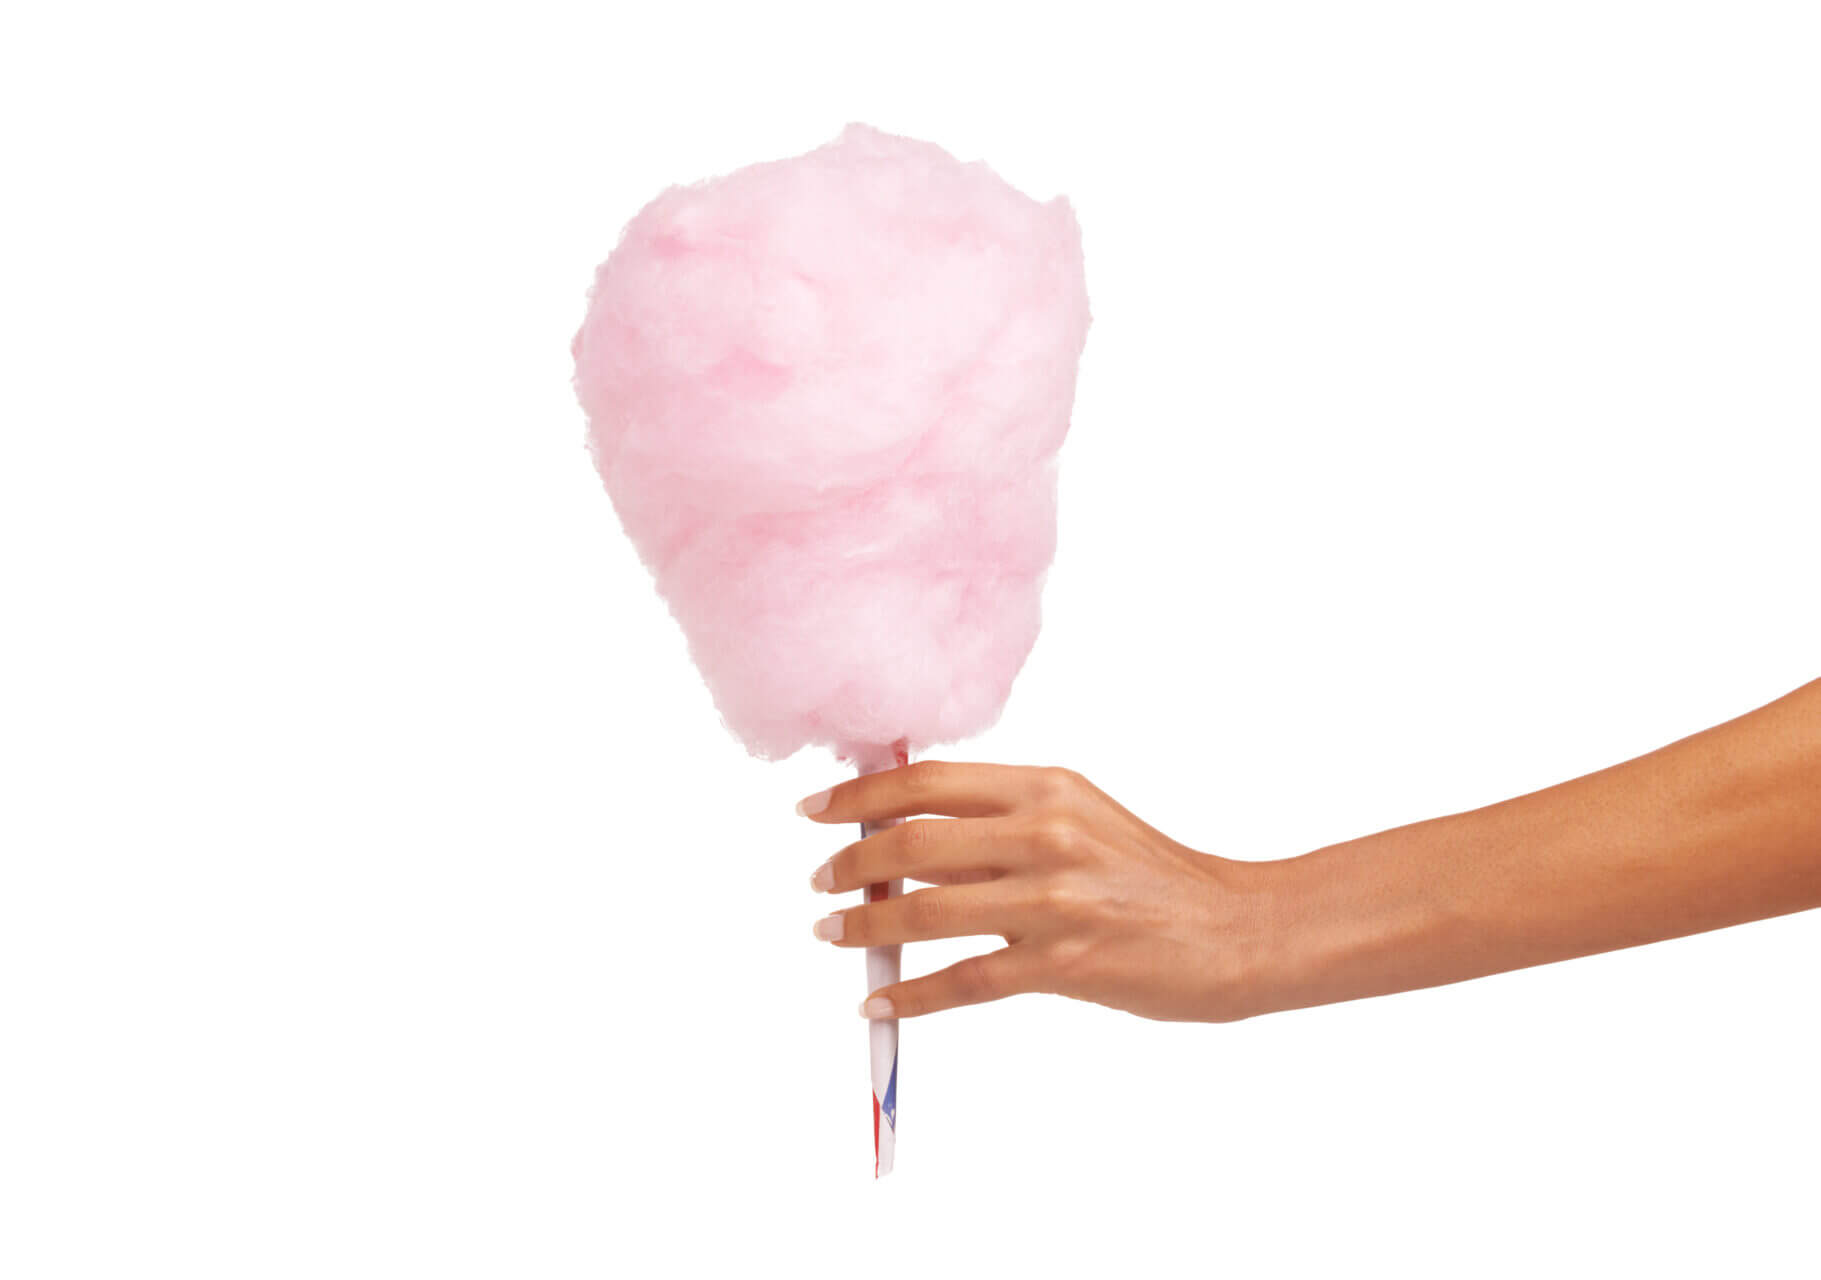 Cotton Candy 101: How Cotton Candy is Made